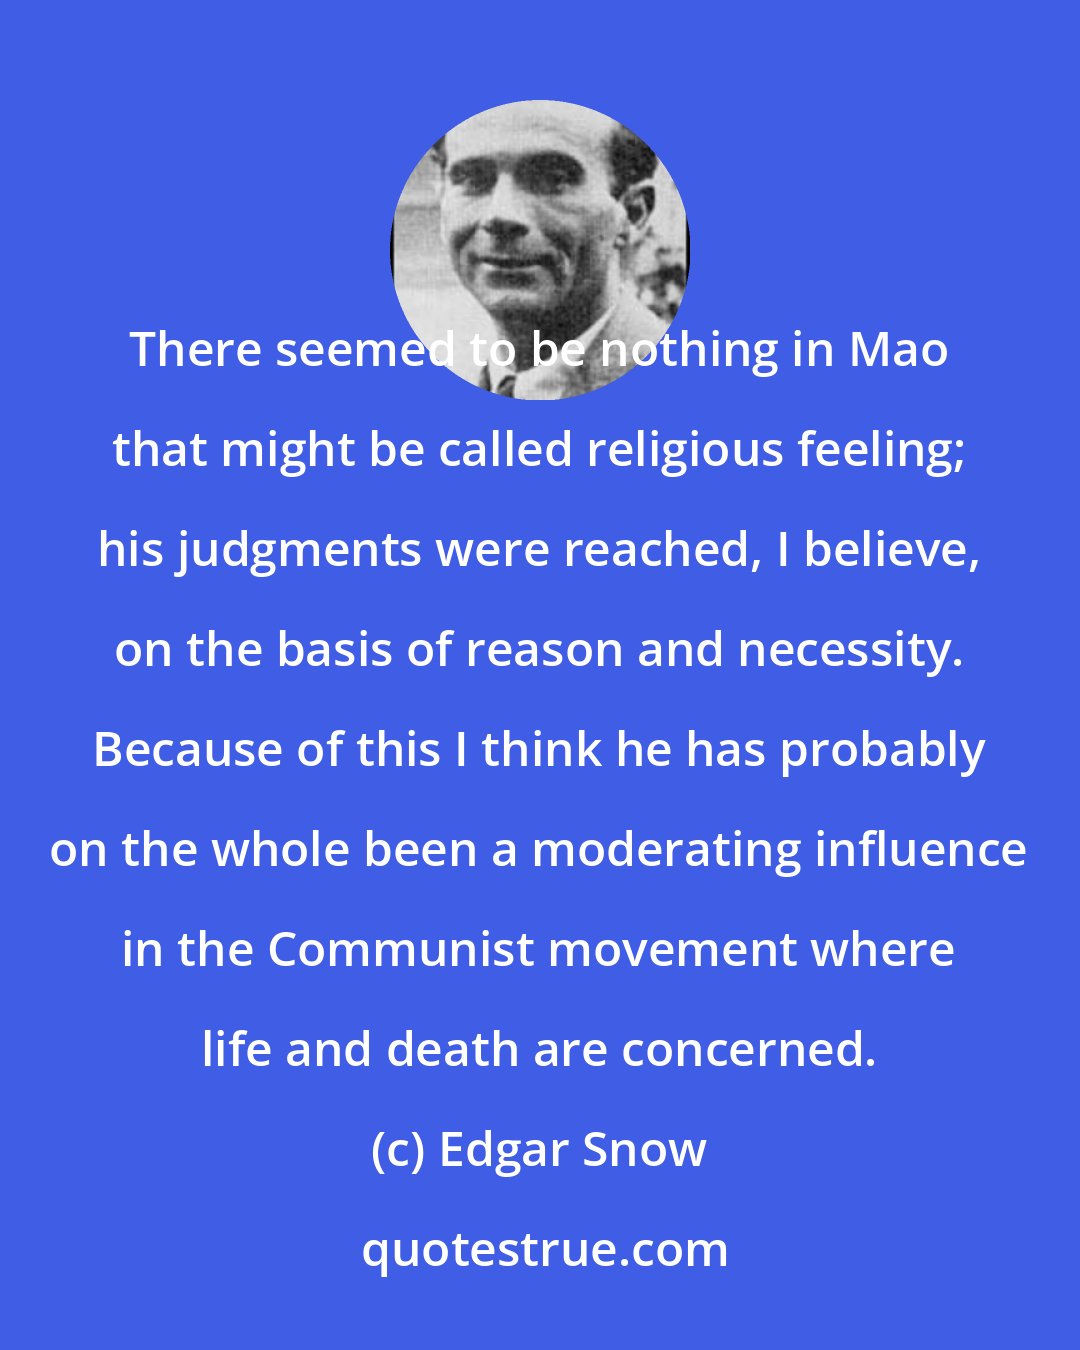 Edgar Snow: There seemed to be nothing in Mao that might be called religious feeling; his judgments were reached, I believe, on the basis of reason and necessity. Because of this I think he has probably on the whole been a moderating influence in the Communist movement where life and death are concerned.